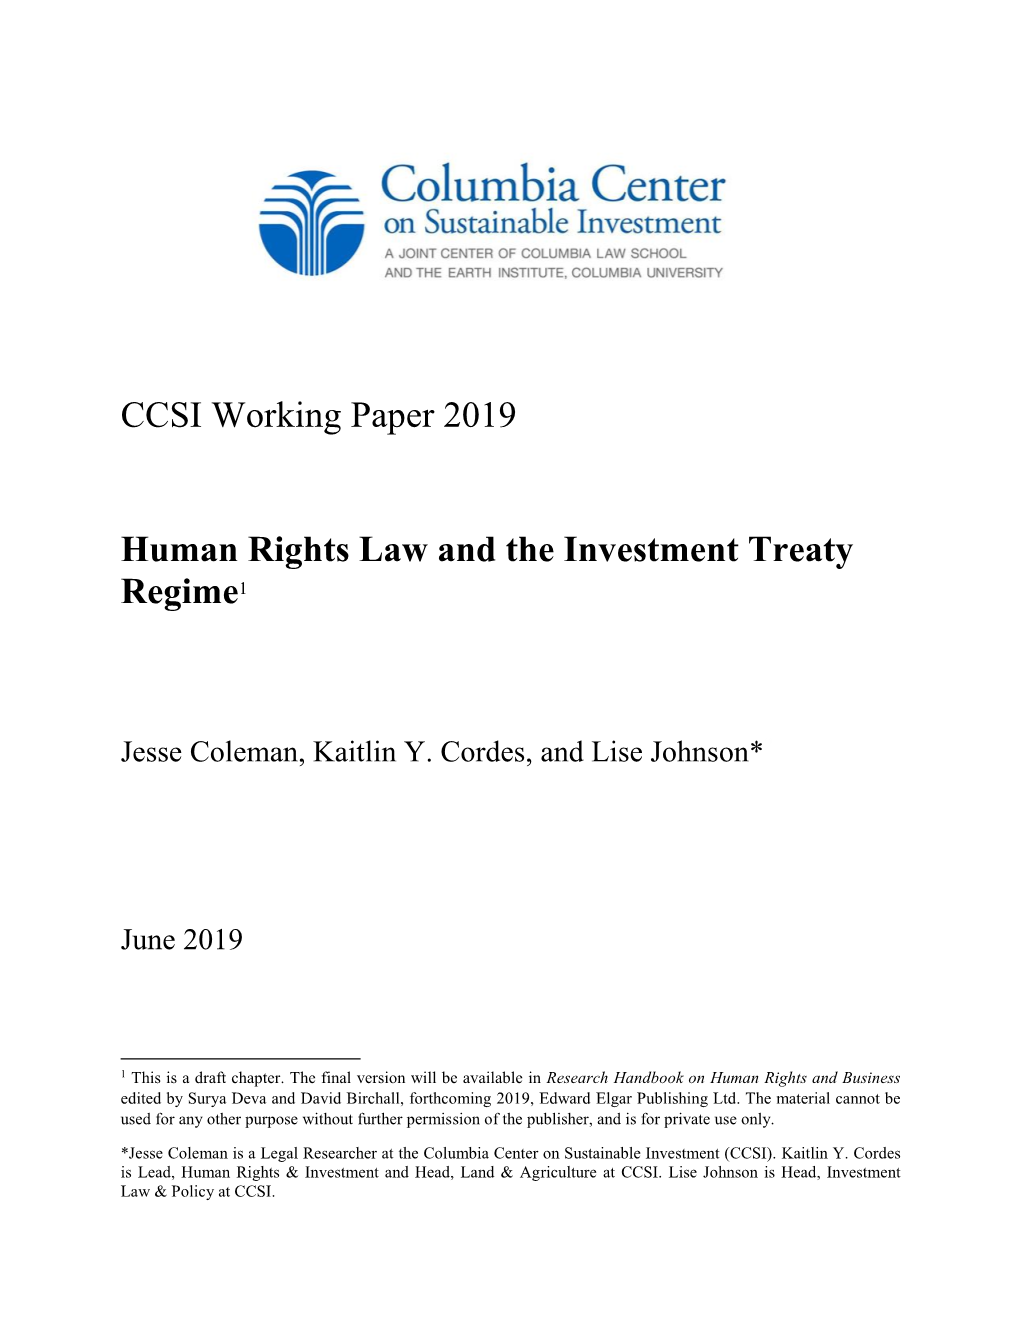 CCSI Working Paper 2019 Human Rights Law and the Investment